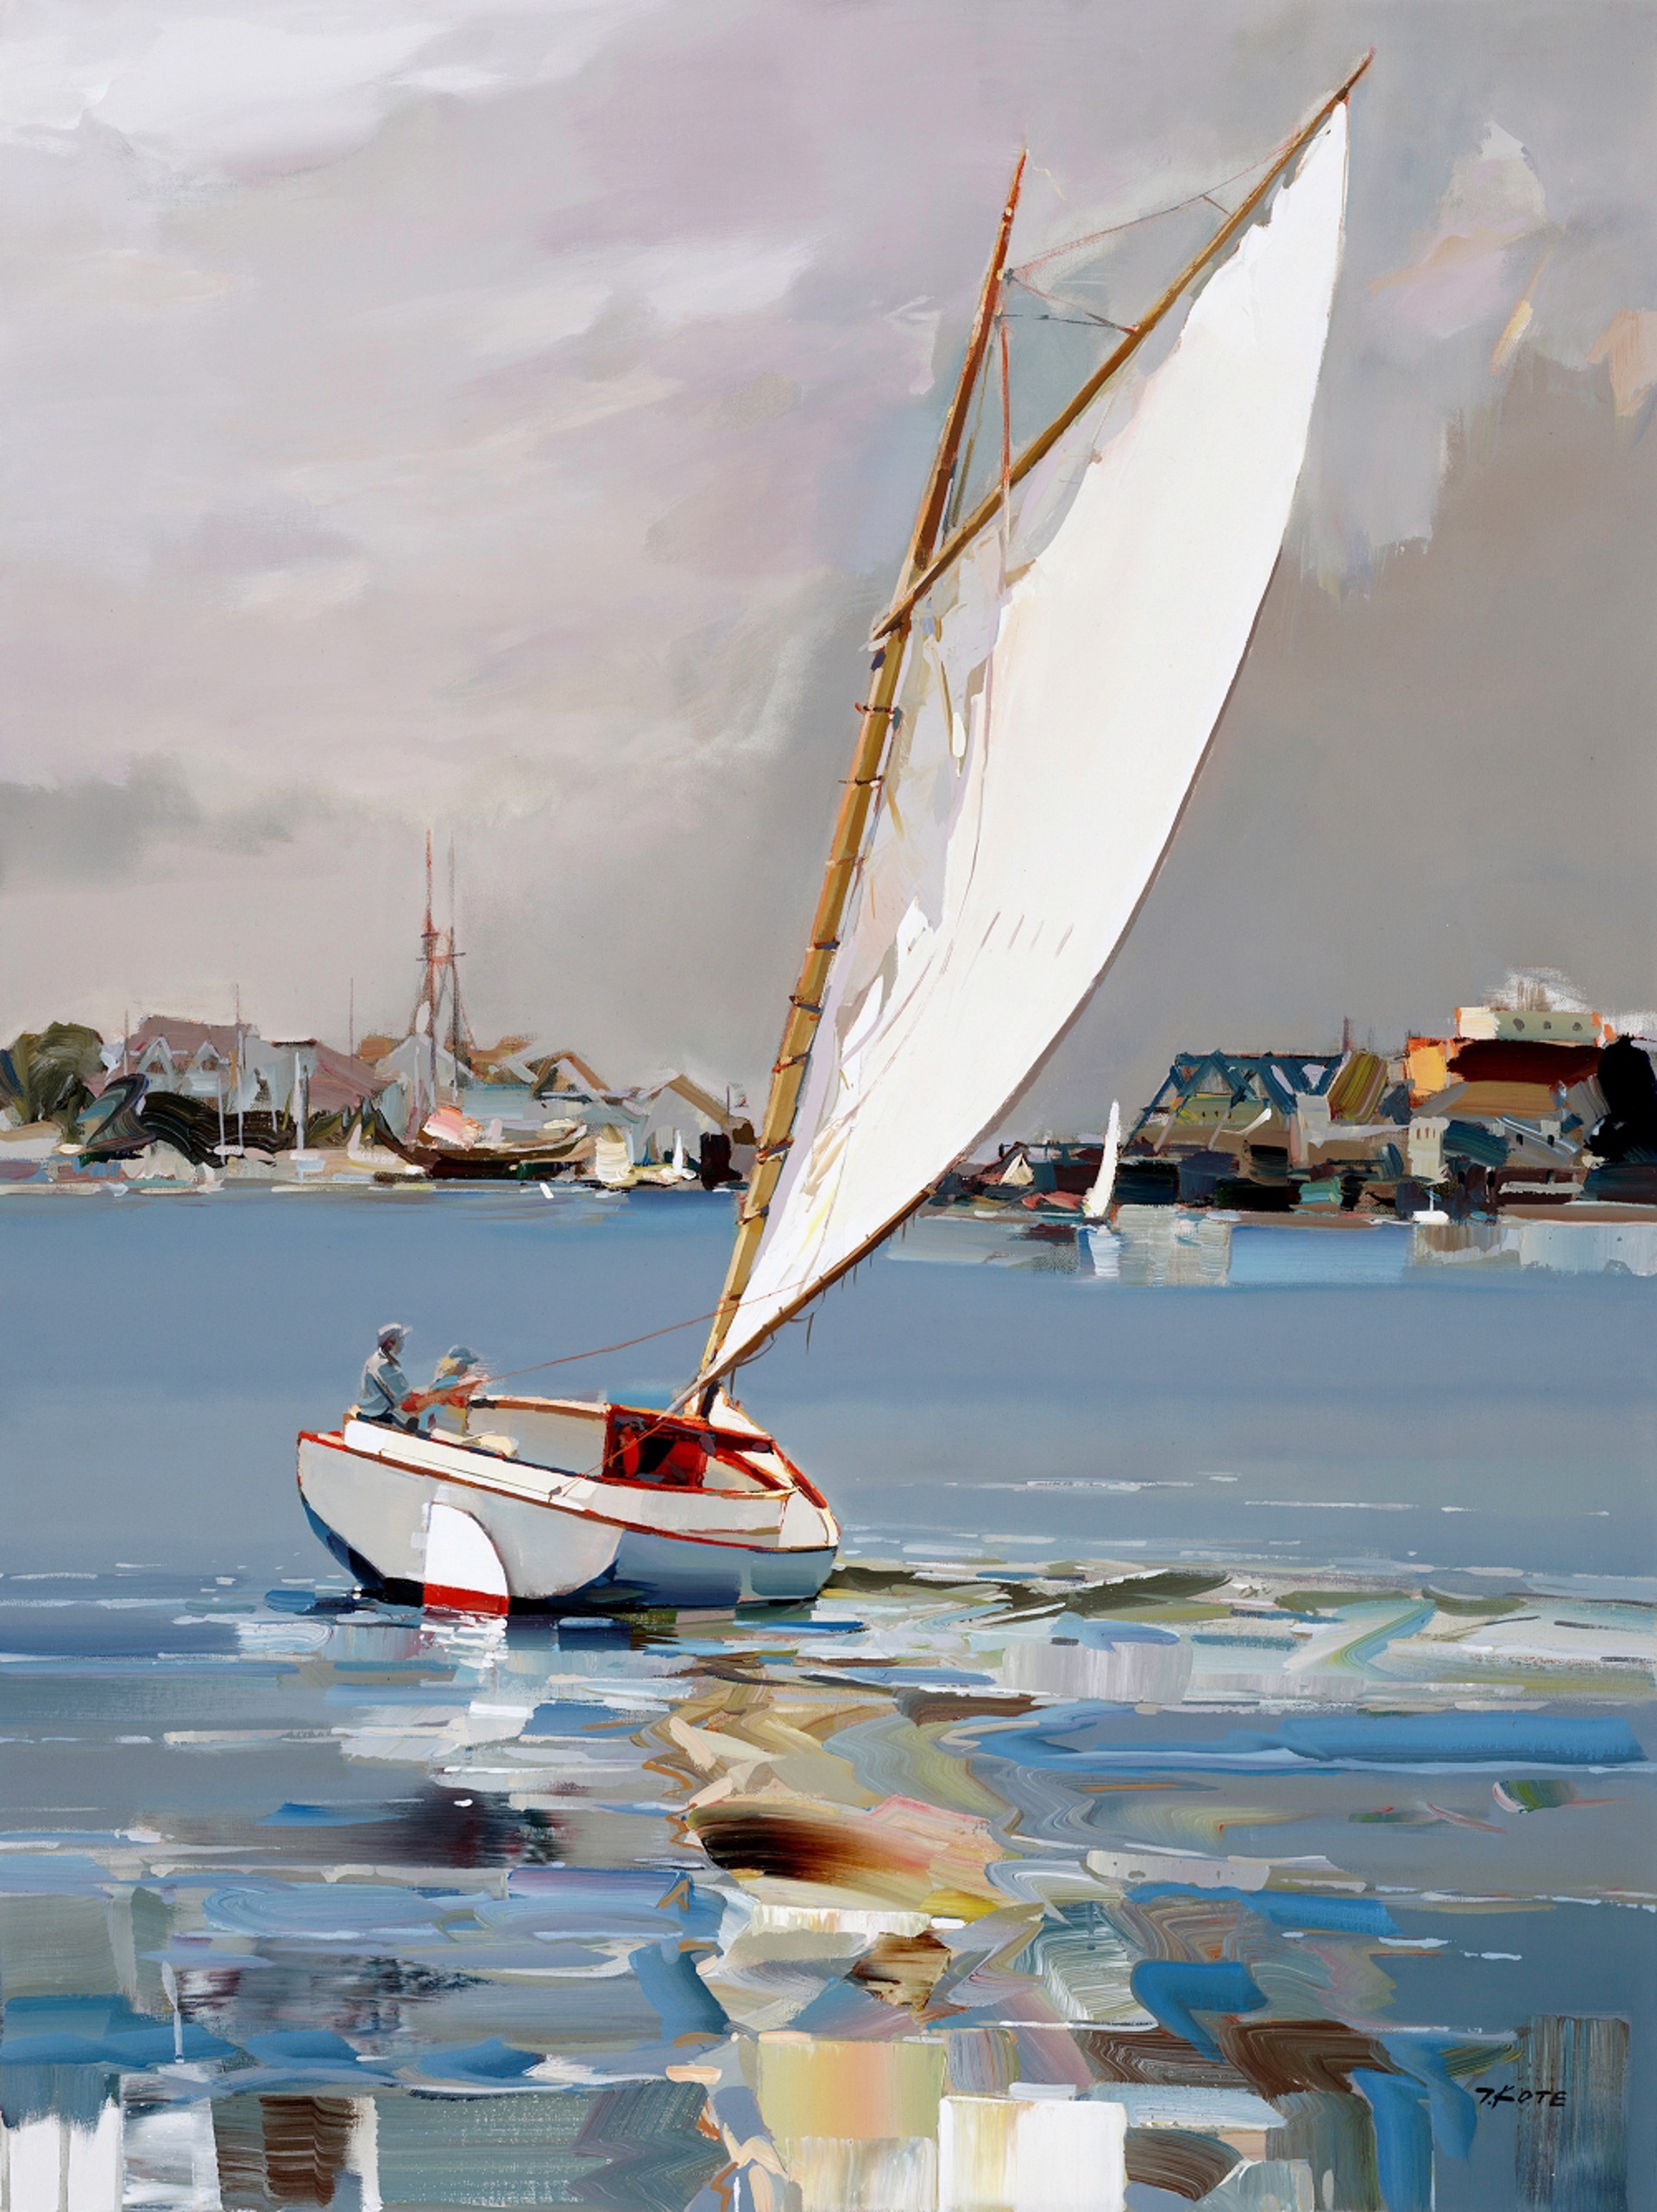 From the Clouds by Josef Kote